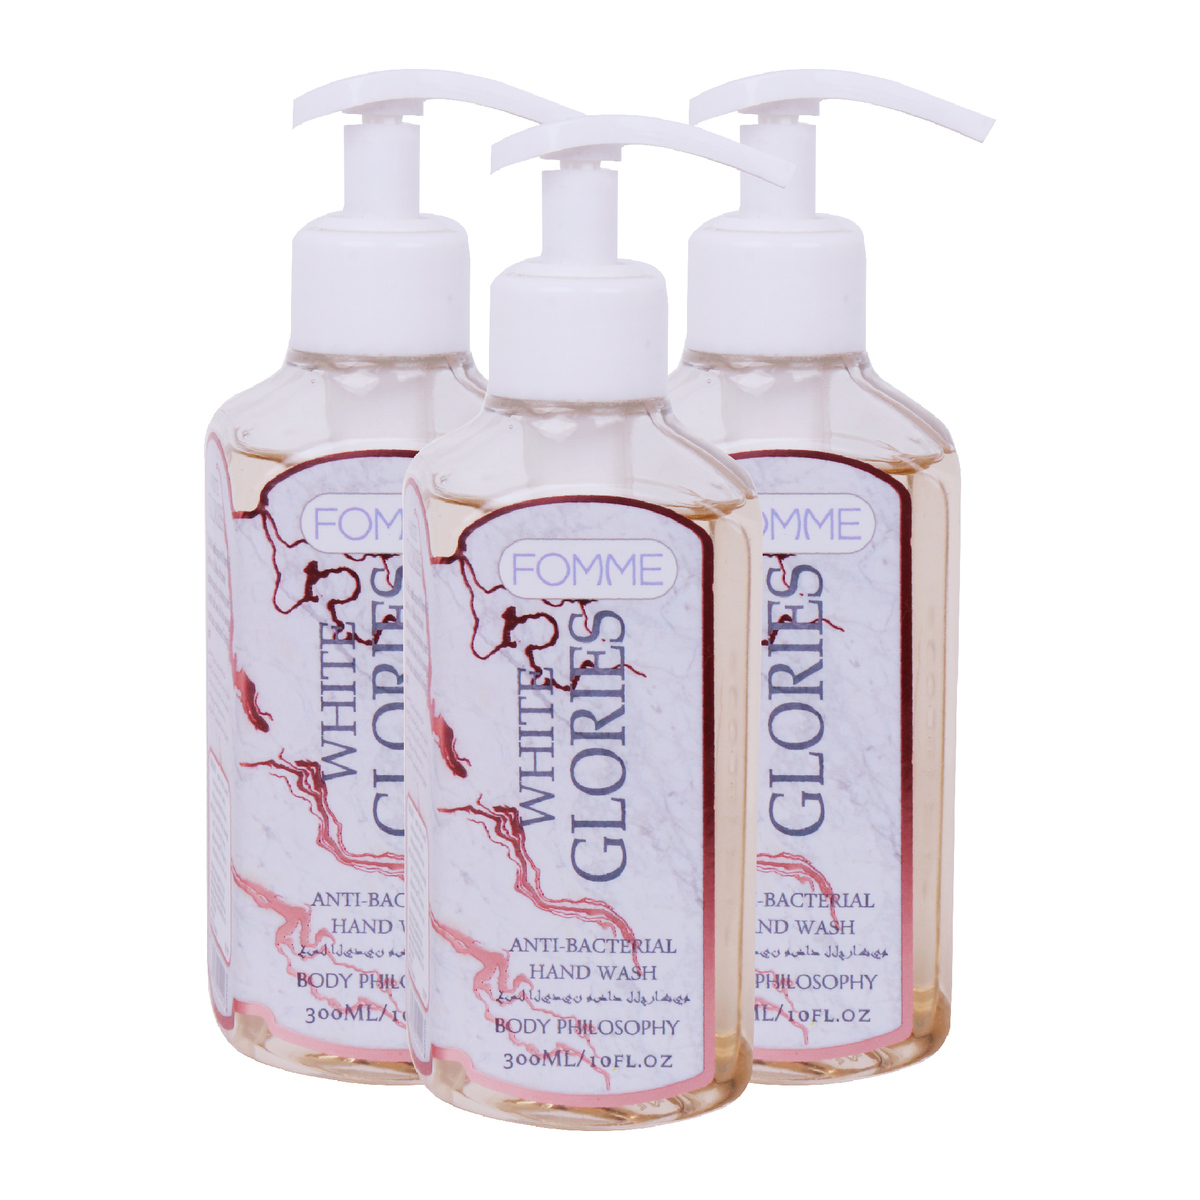 Fomme Anti-Bacterial Handwash Assorted 3 x 300ml